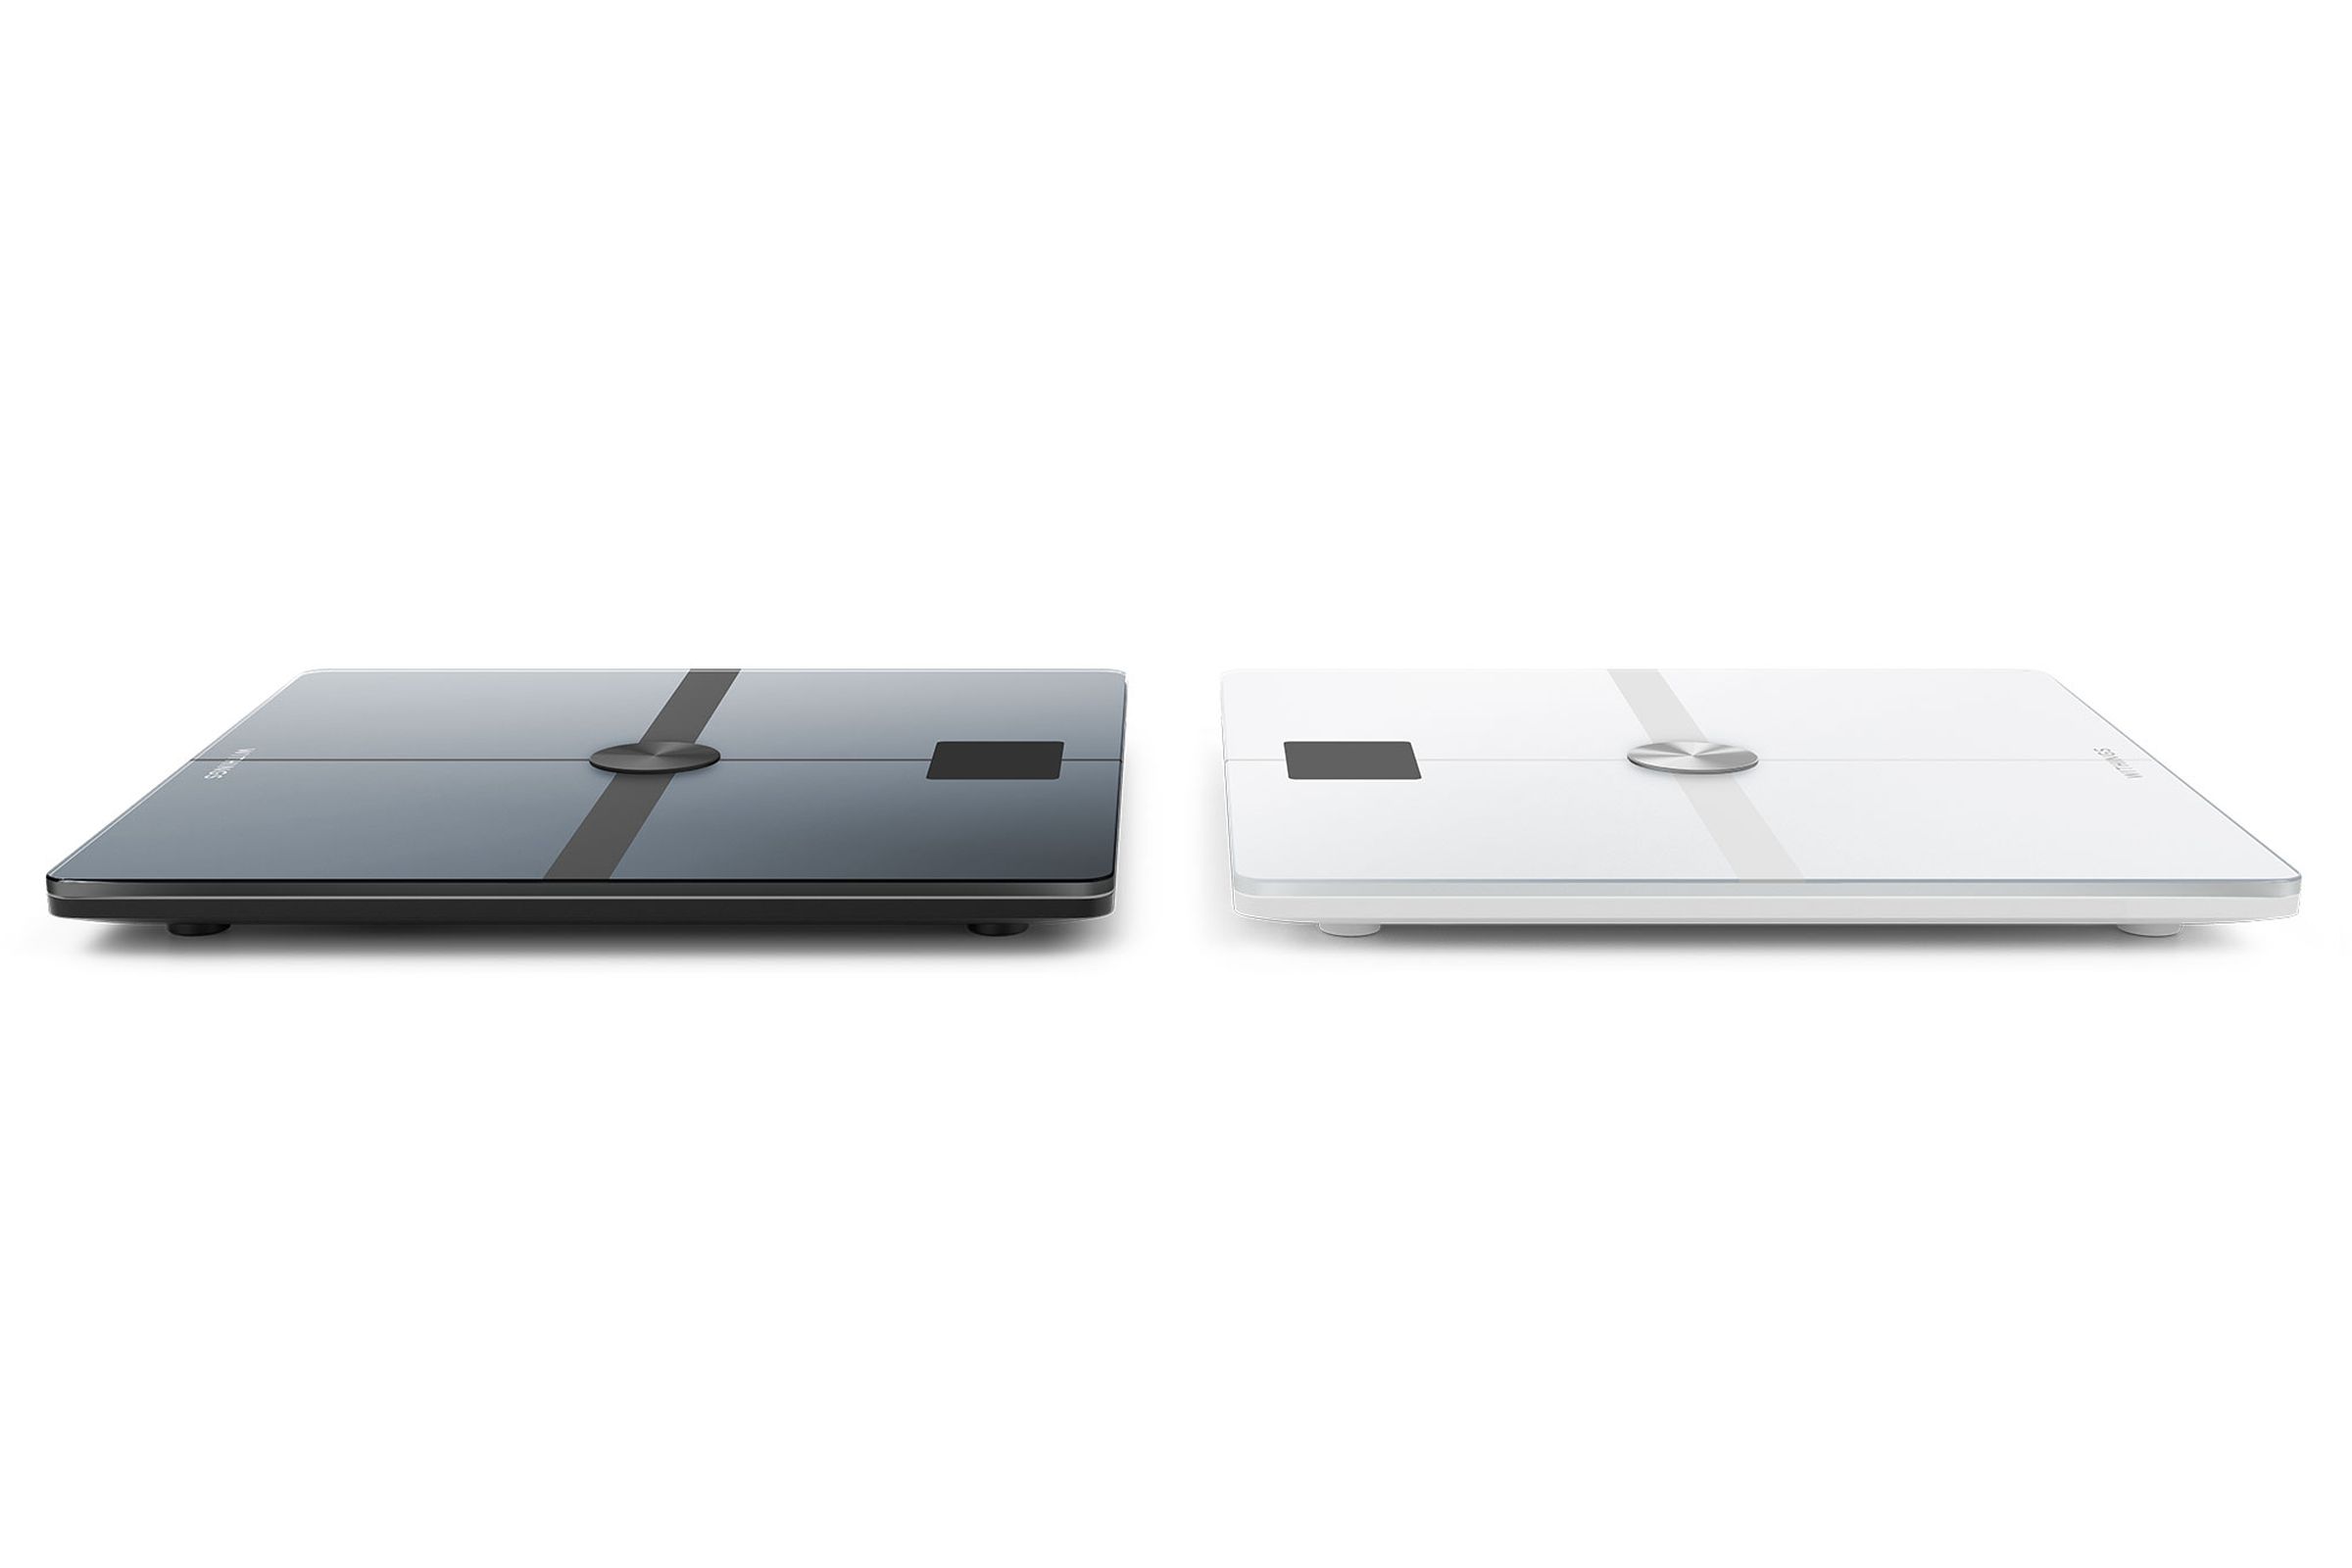 Black and white Withings Smart scales from side, sitting back-to-back.